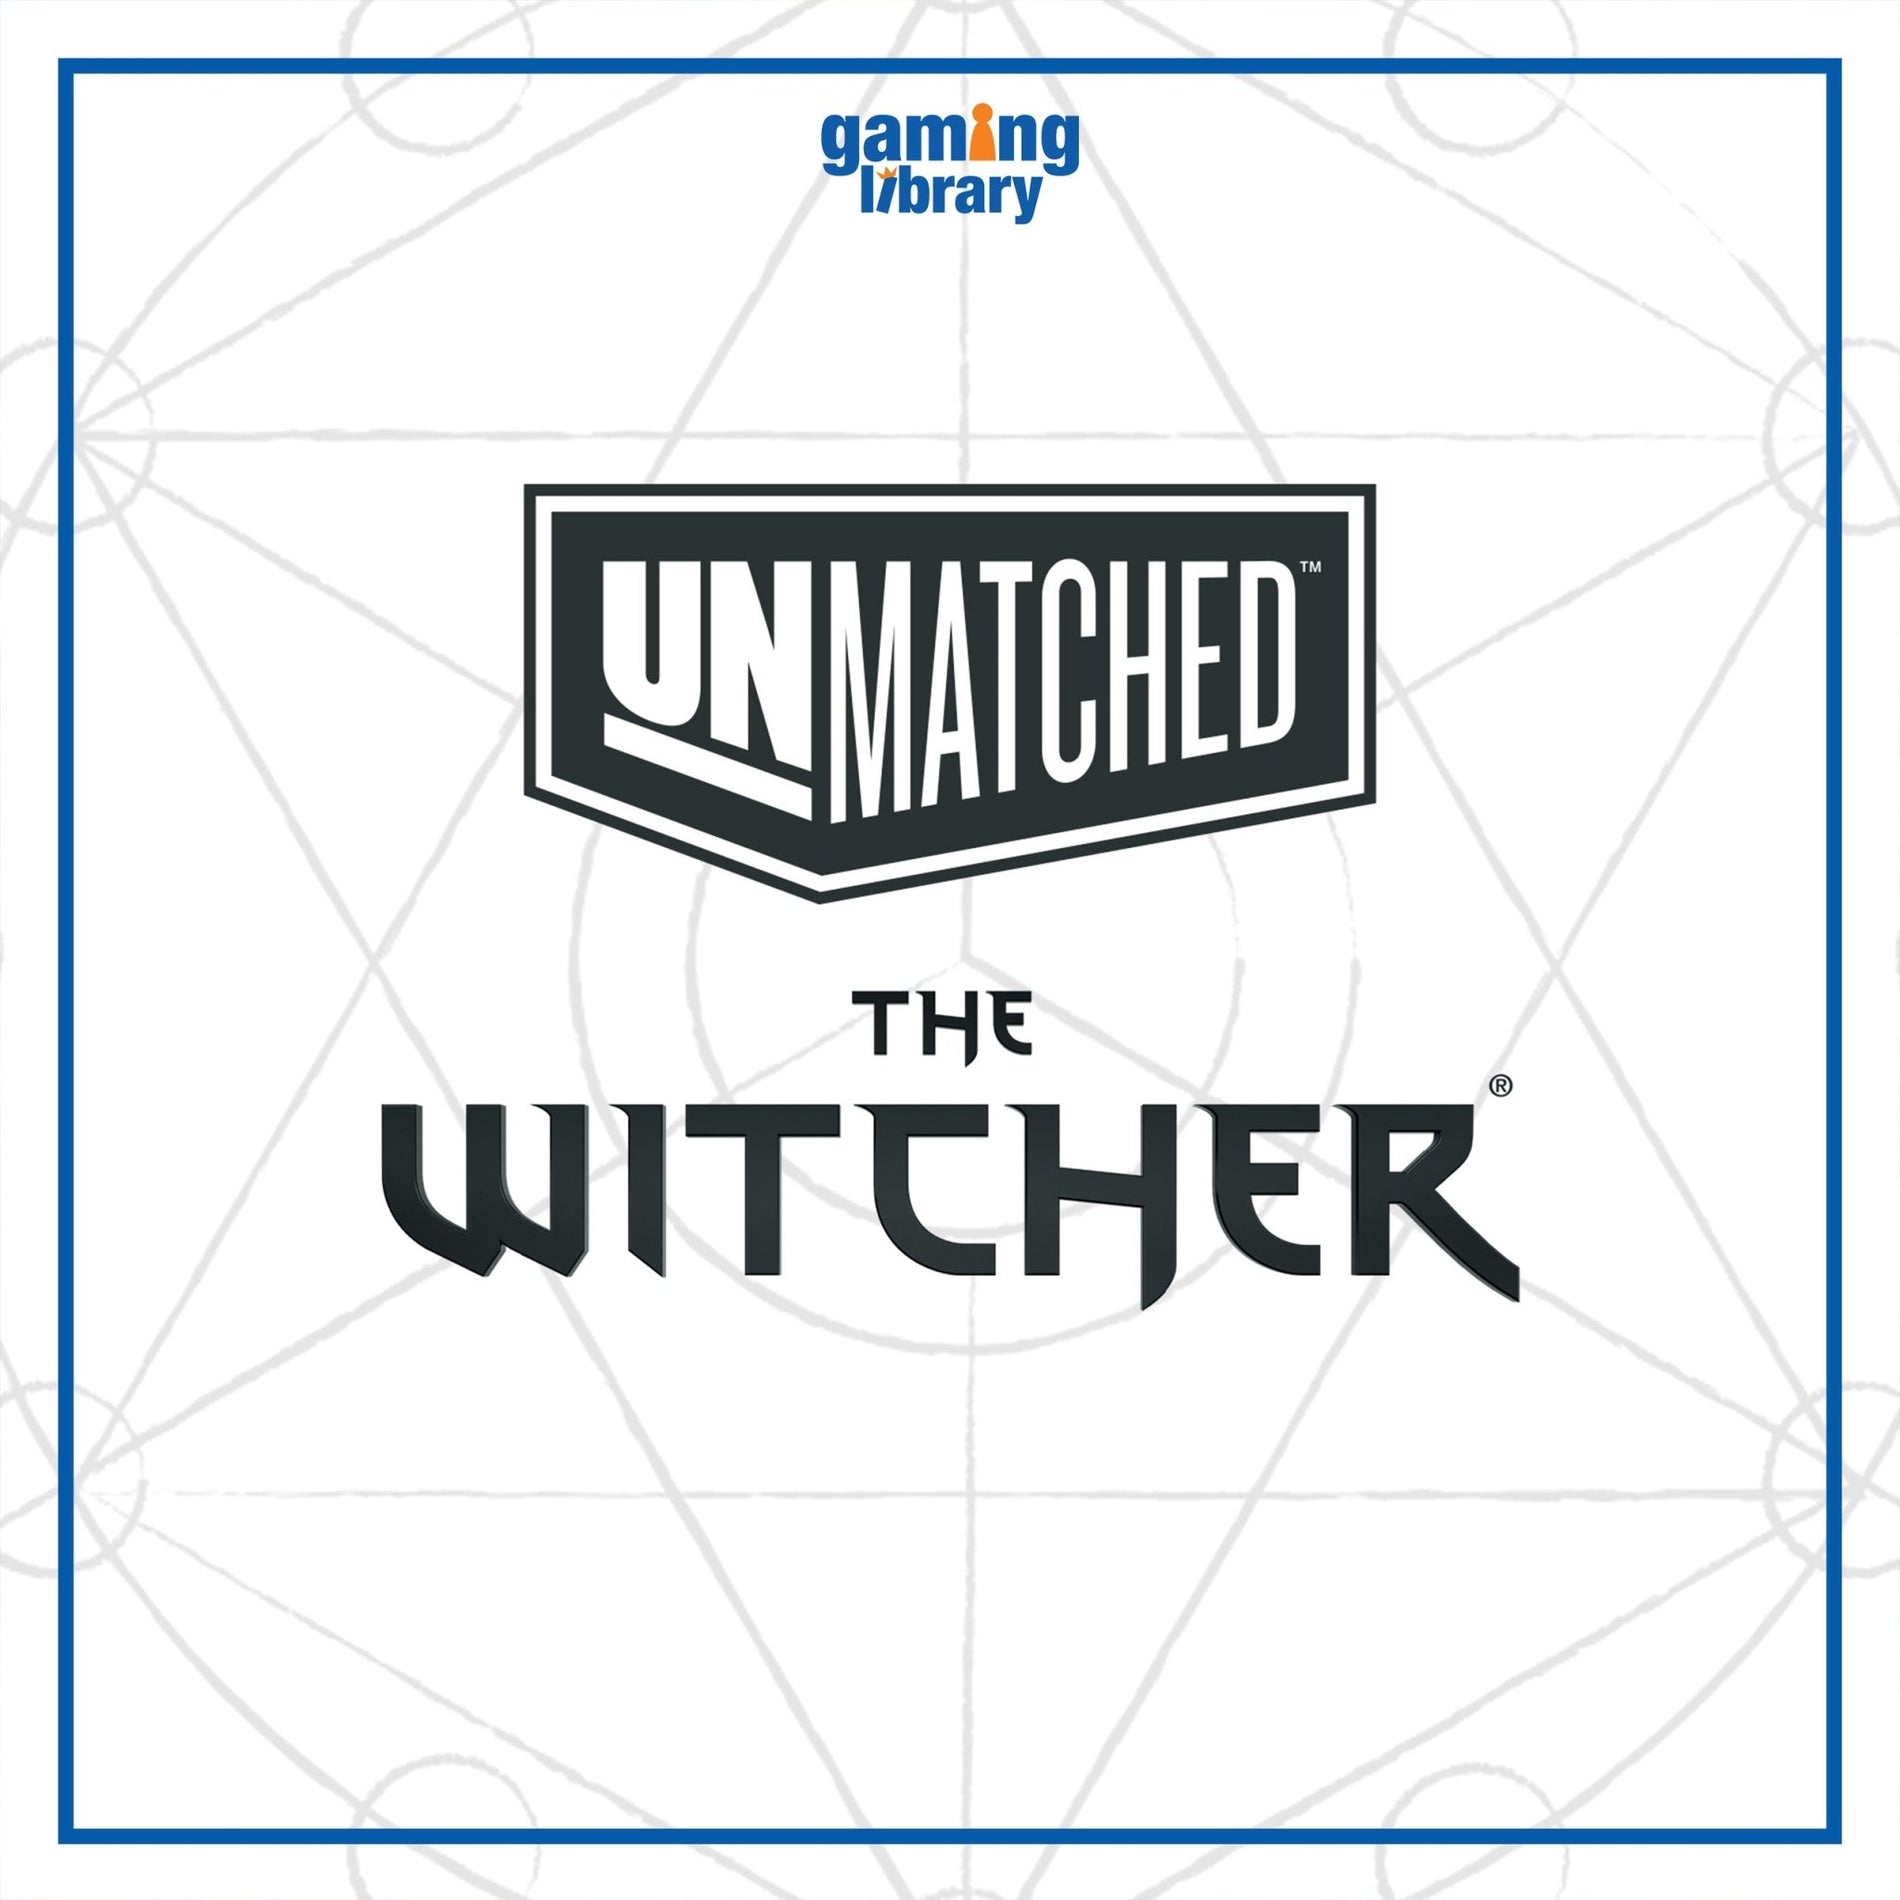 Geralt and Ciri are coming Unmatched - The Witcher! 🐺⚔️ - Gaming Library